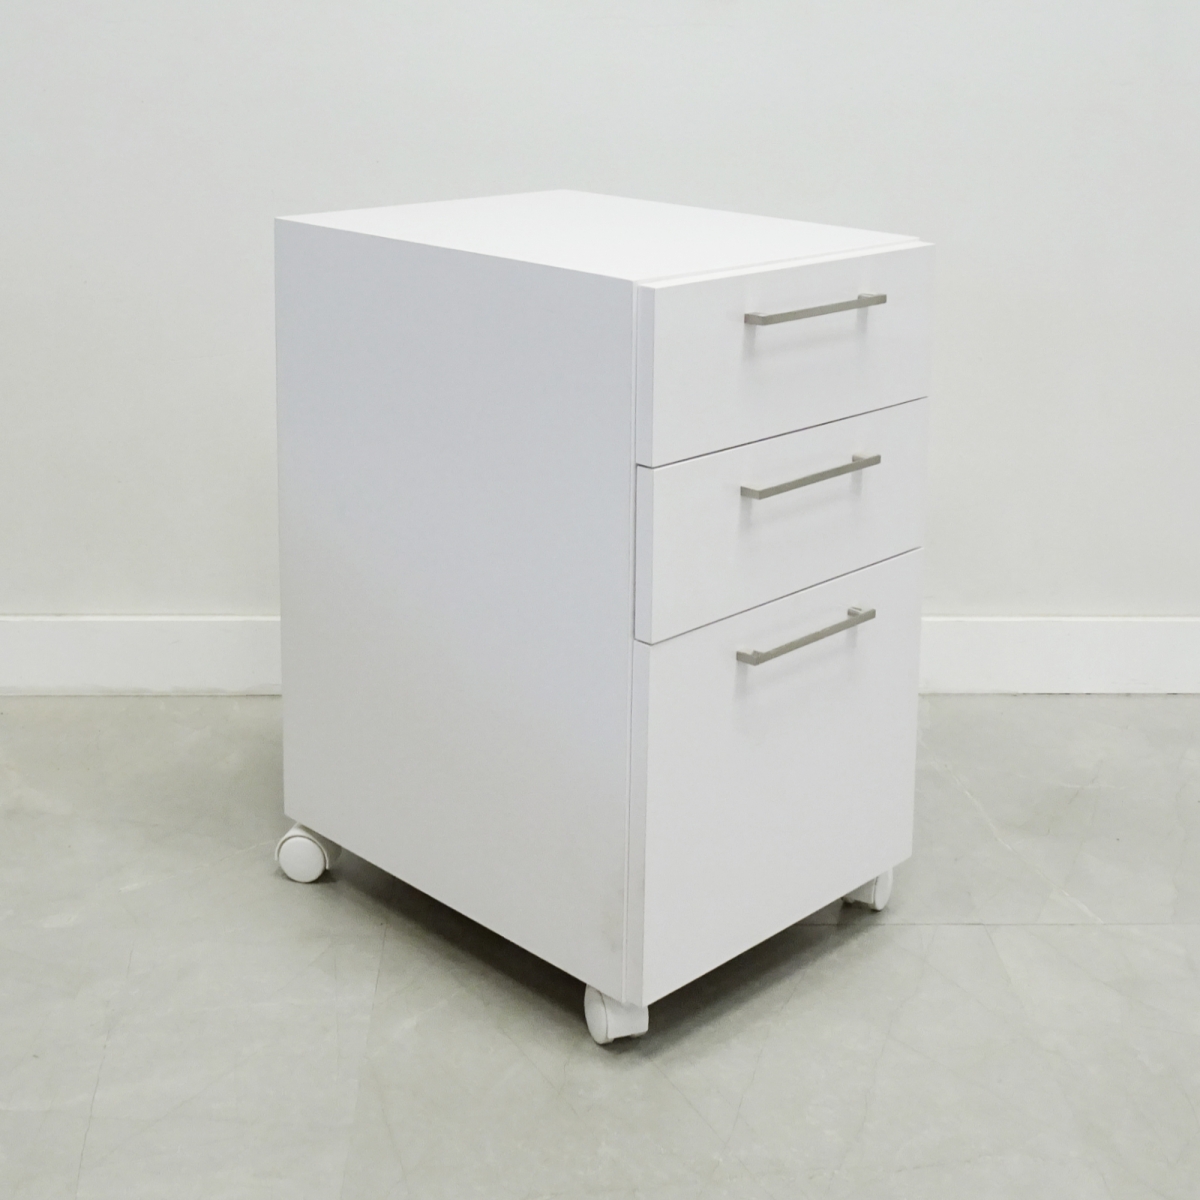 28 In. Axis Mobile Storage Cabinet Stock #1001-S